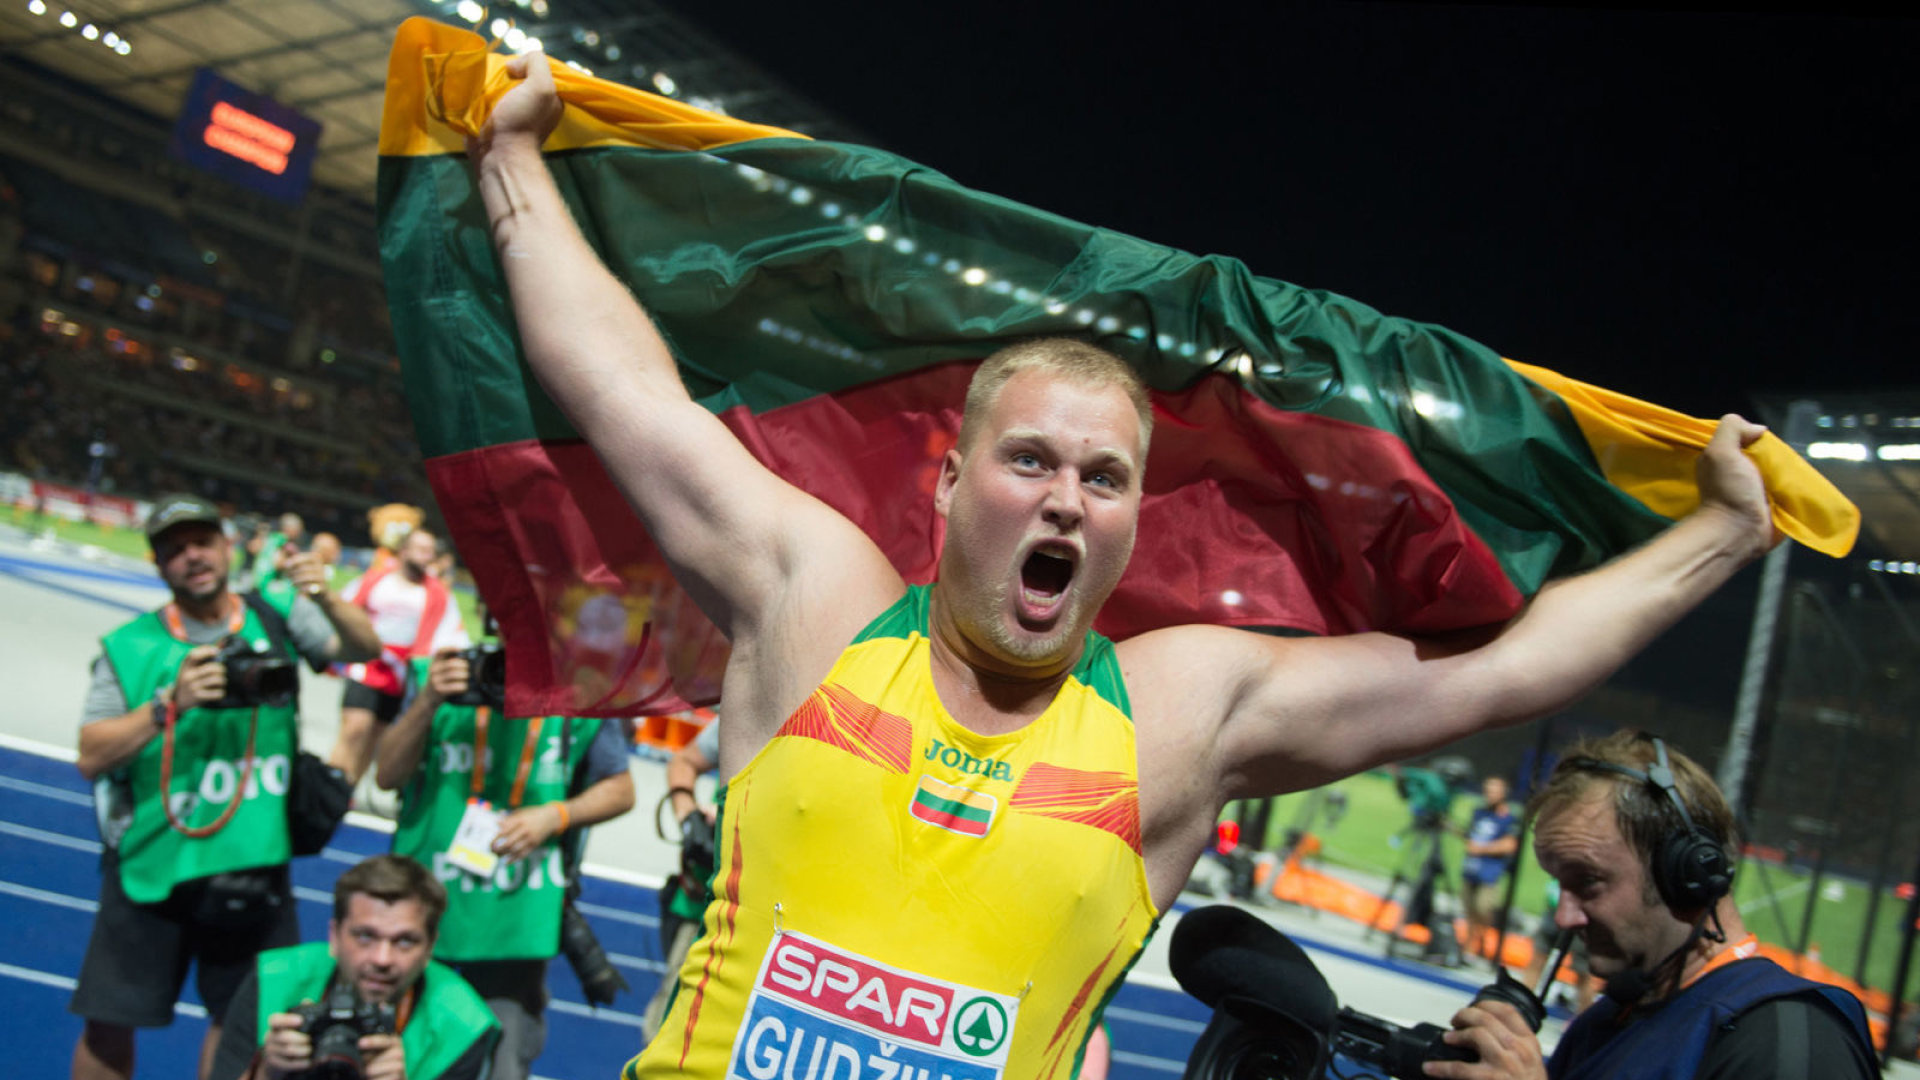 Andrius Gudzius, August highlight, Sports photography, Pride of Lithuania, 1920x1080 Full HD Desktop